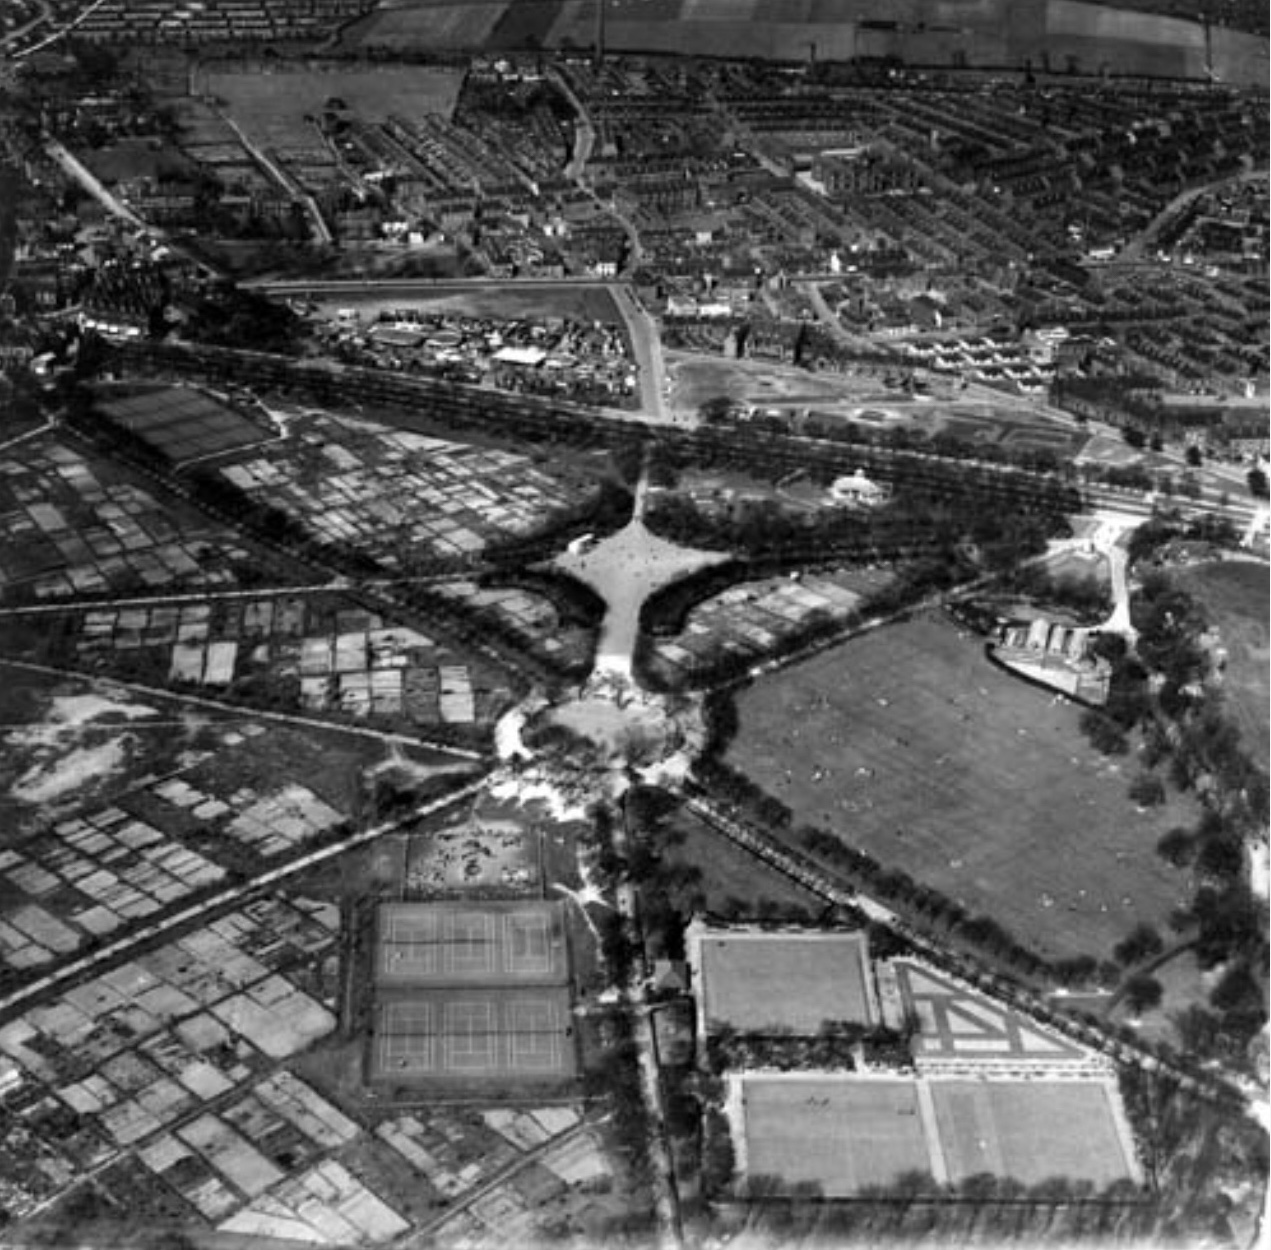 Woodhouse Moor with Feast, from the Air, 1951